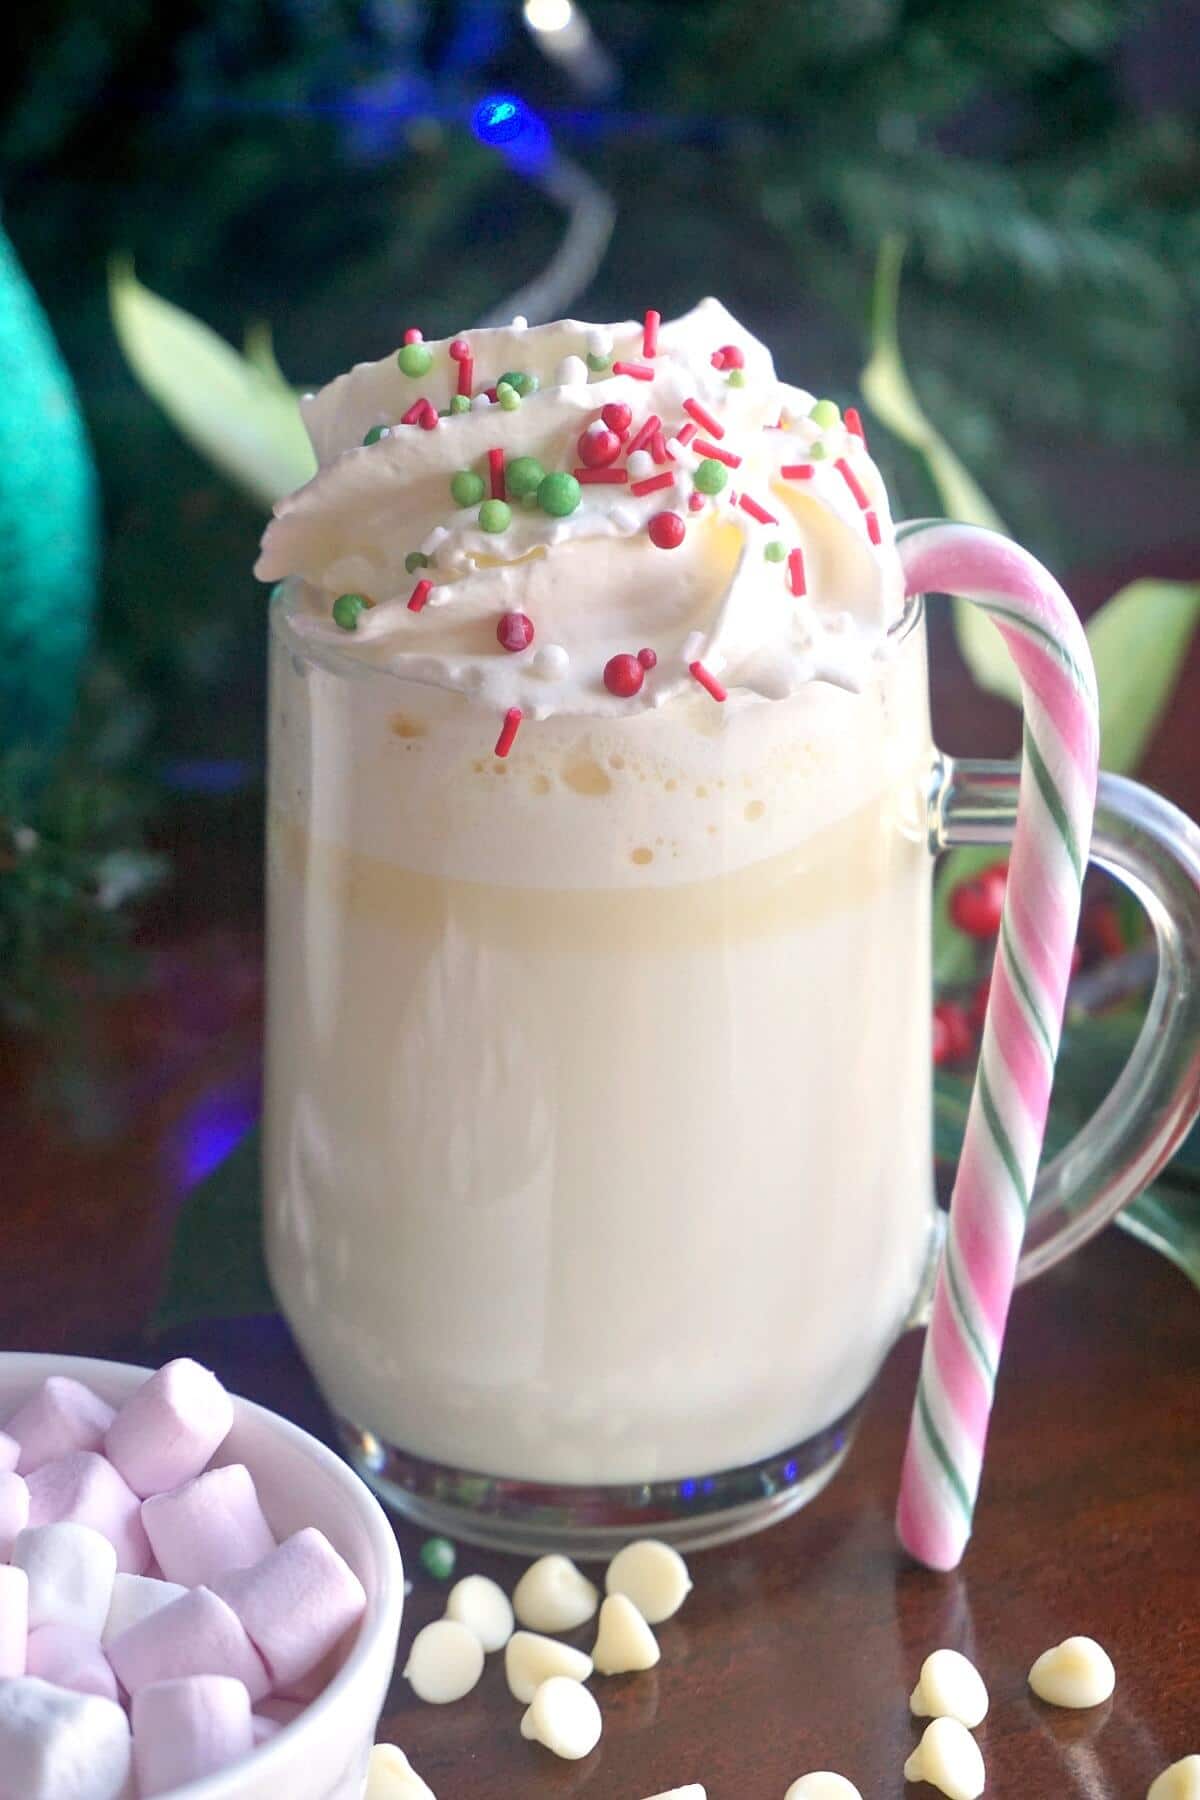 A glass of white hot chocolate with cream and sprinkles and a candy cane on the glass.